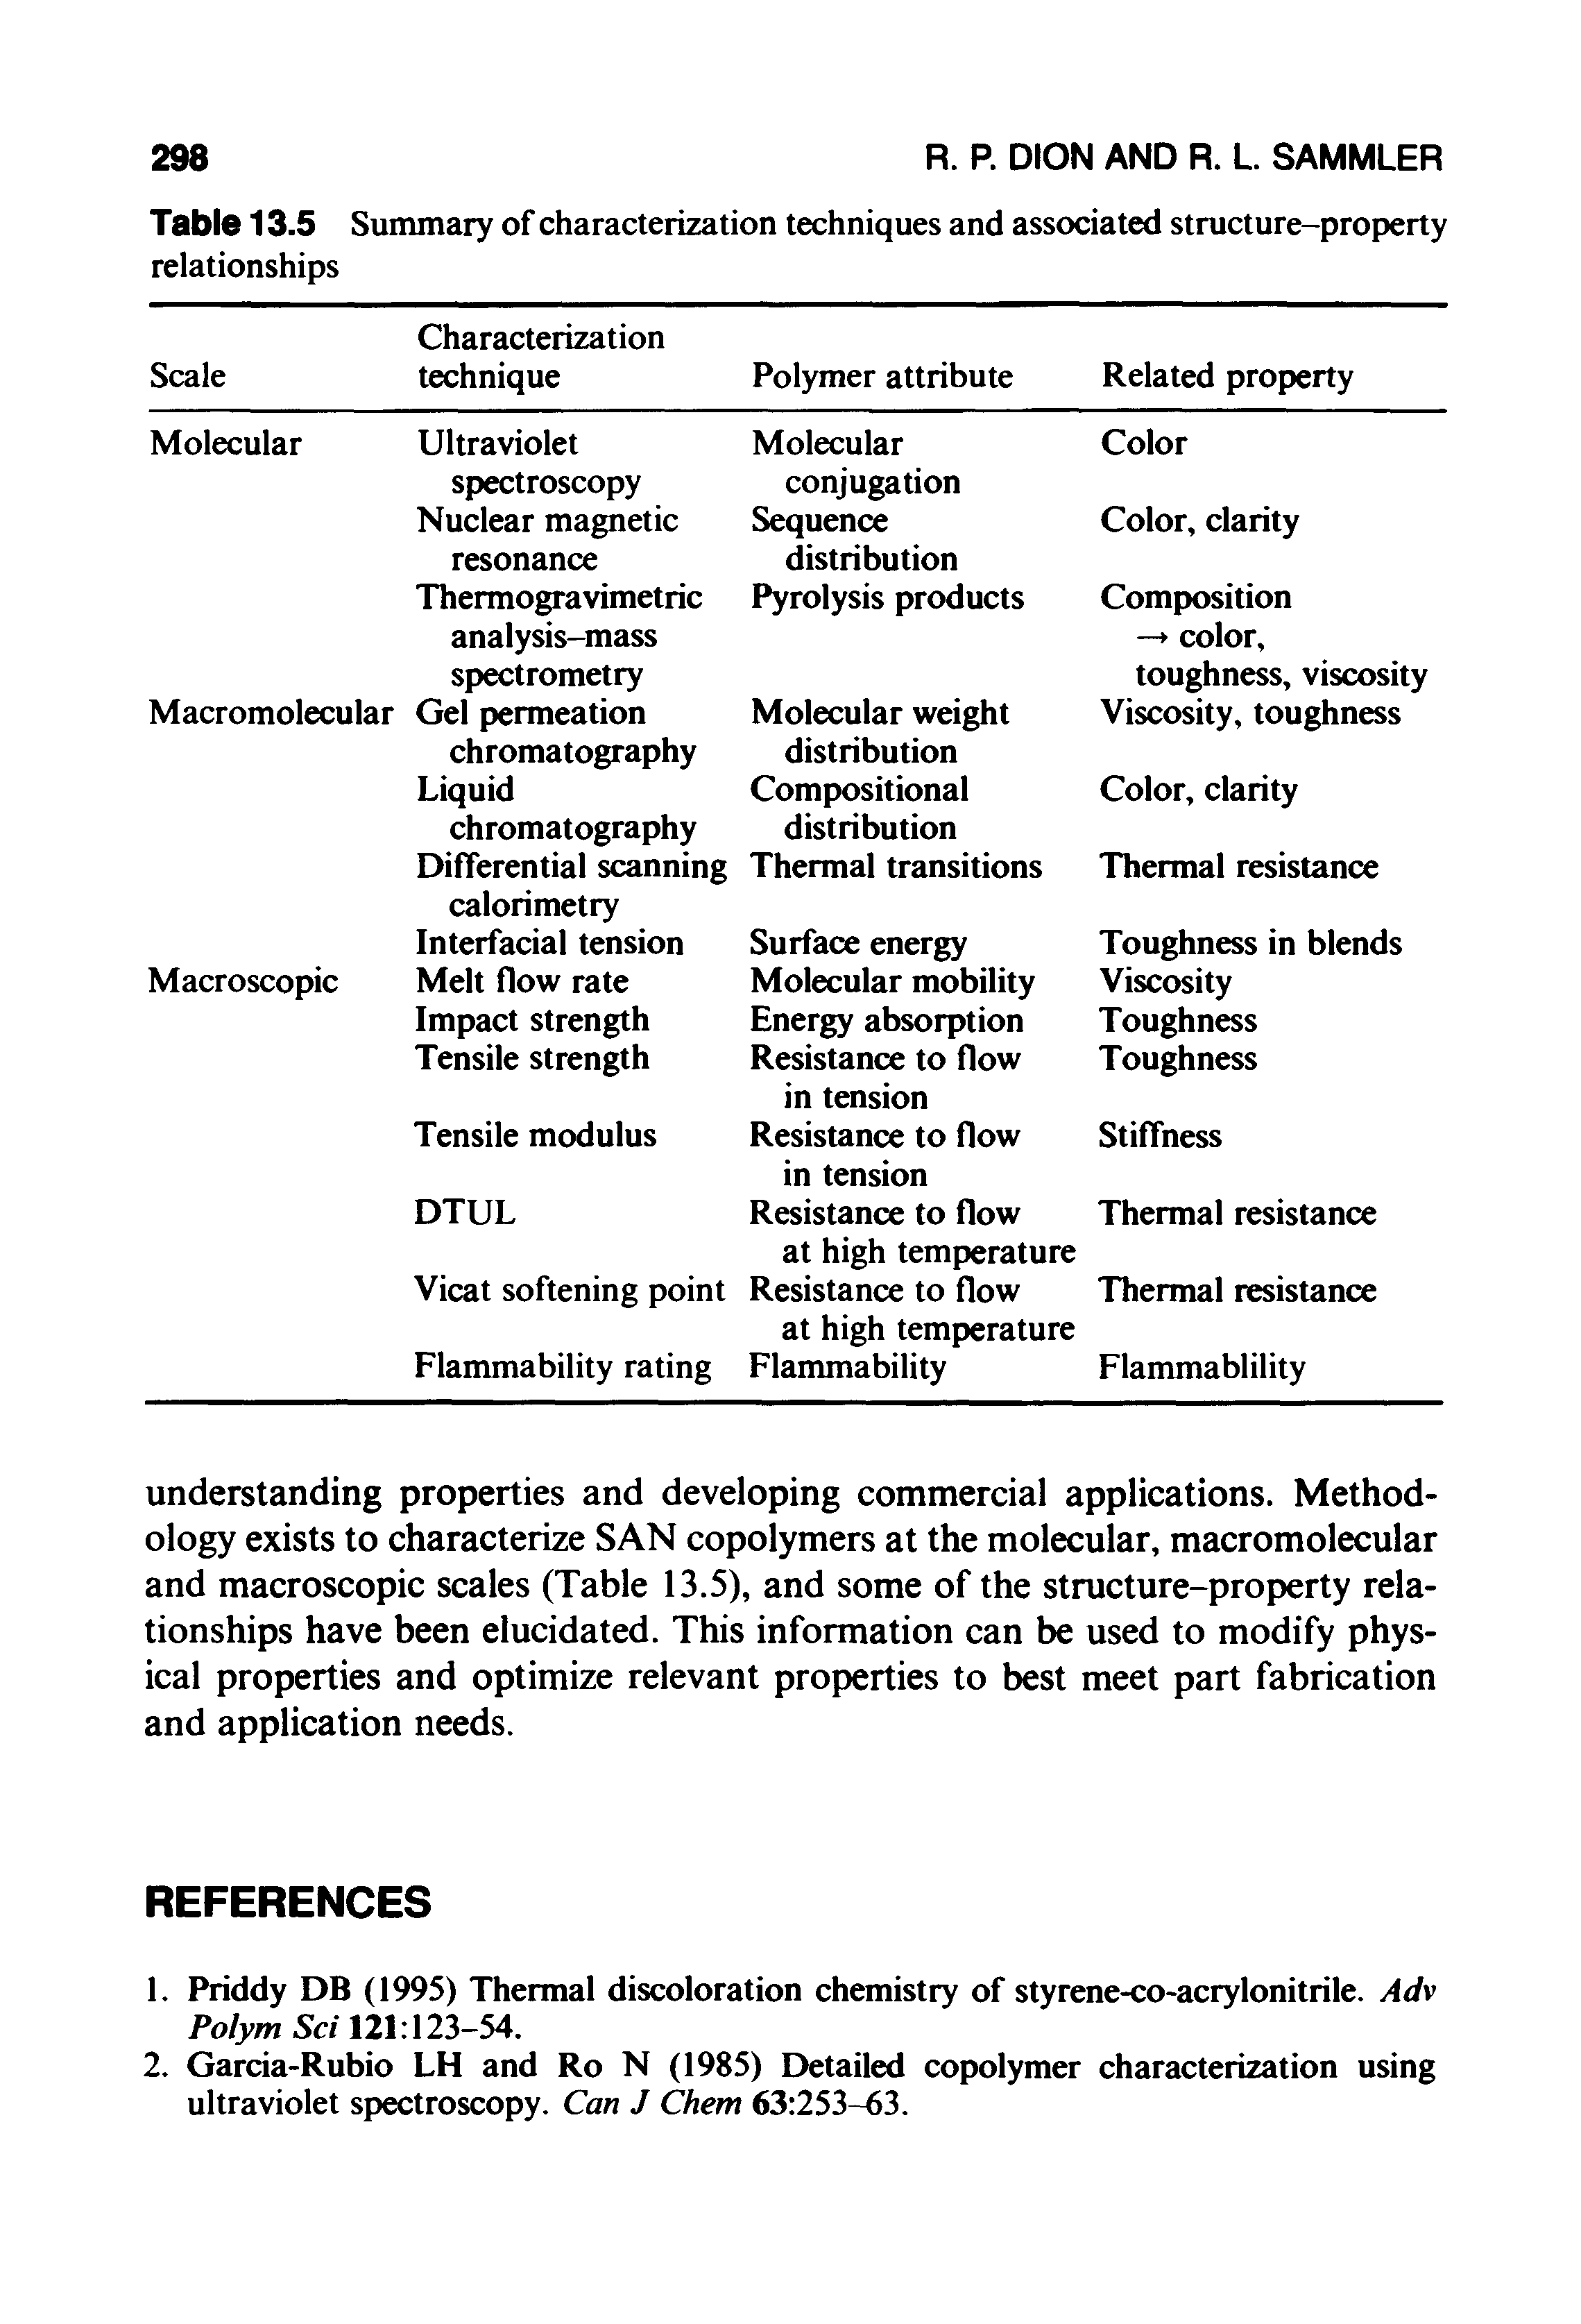 Table 13.5 Summary of characterization techniques and associated structure-property relationships...